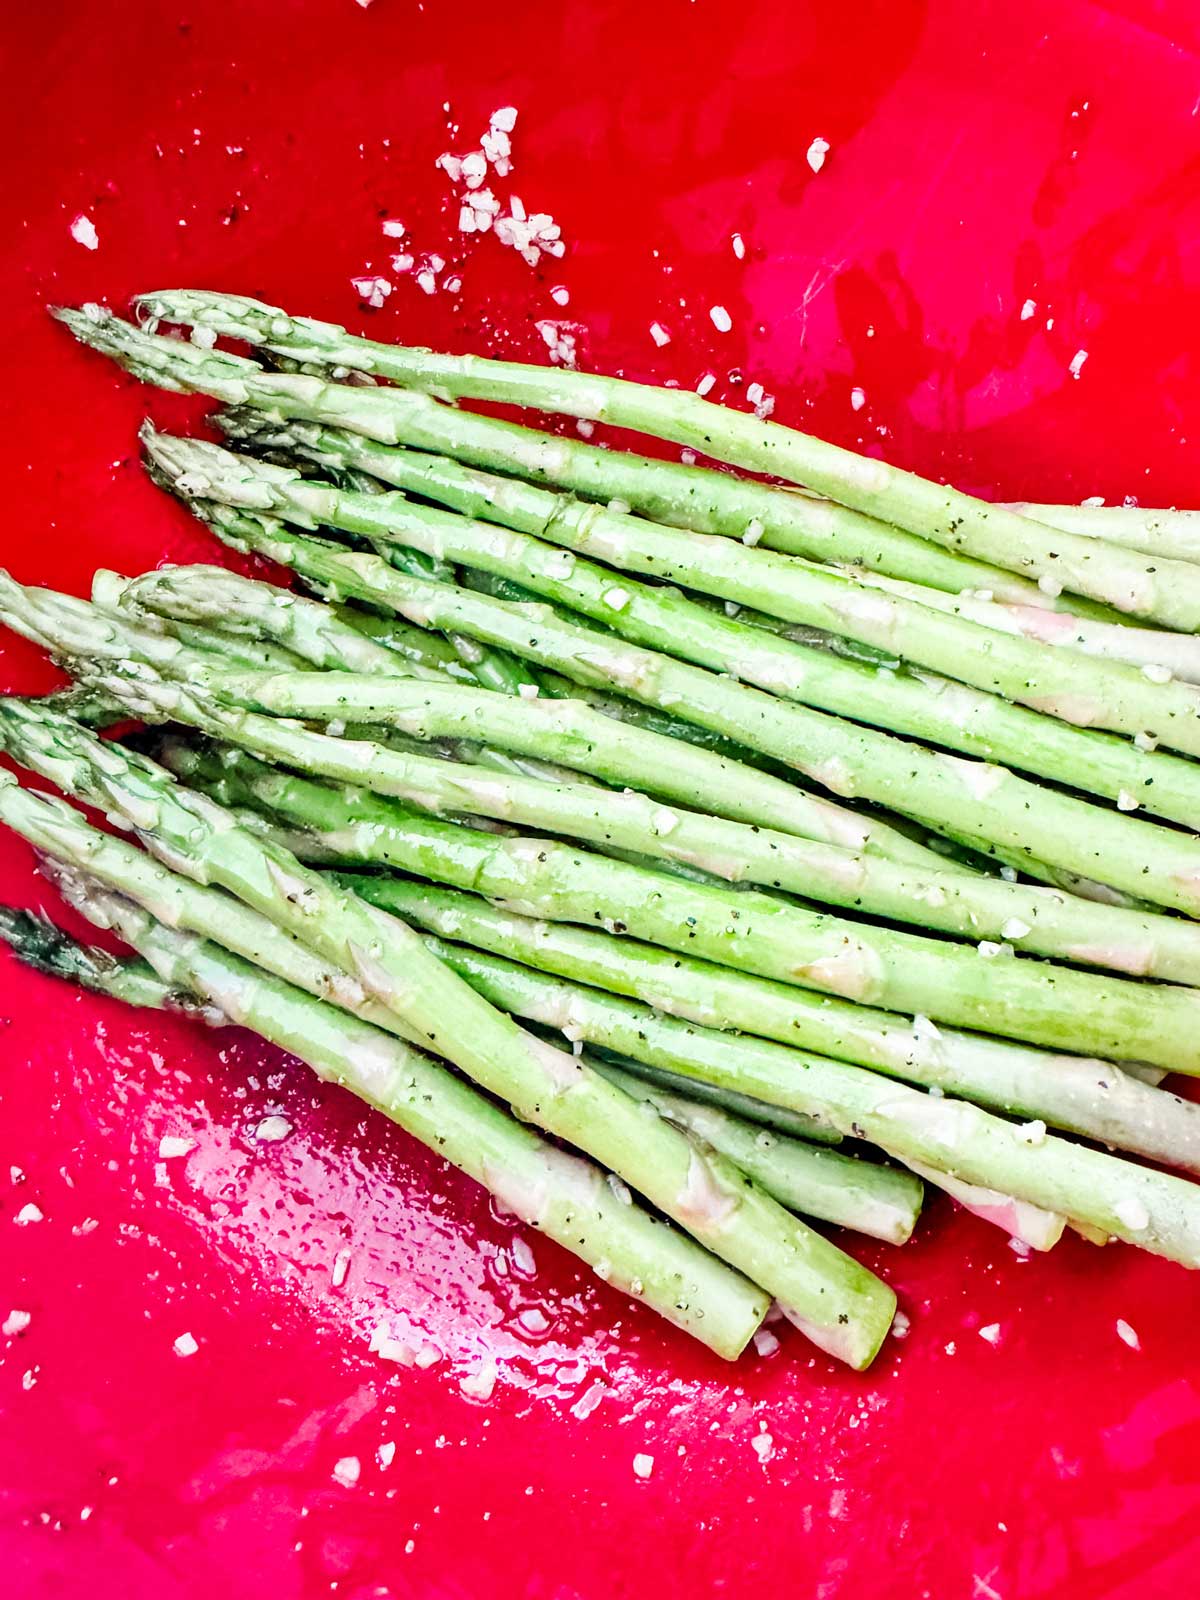 Asparagus in a red bowl that has been tossed with garlic, oil, and seasonings.